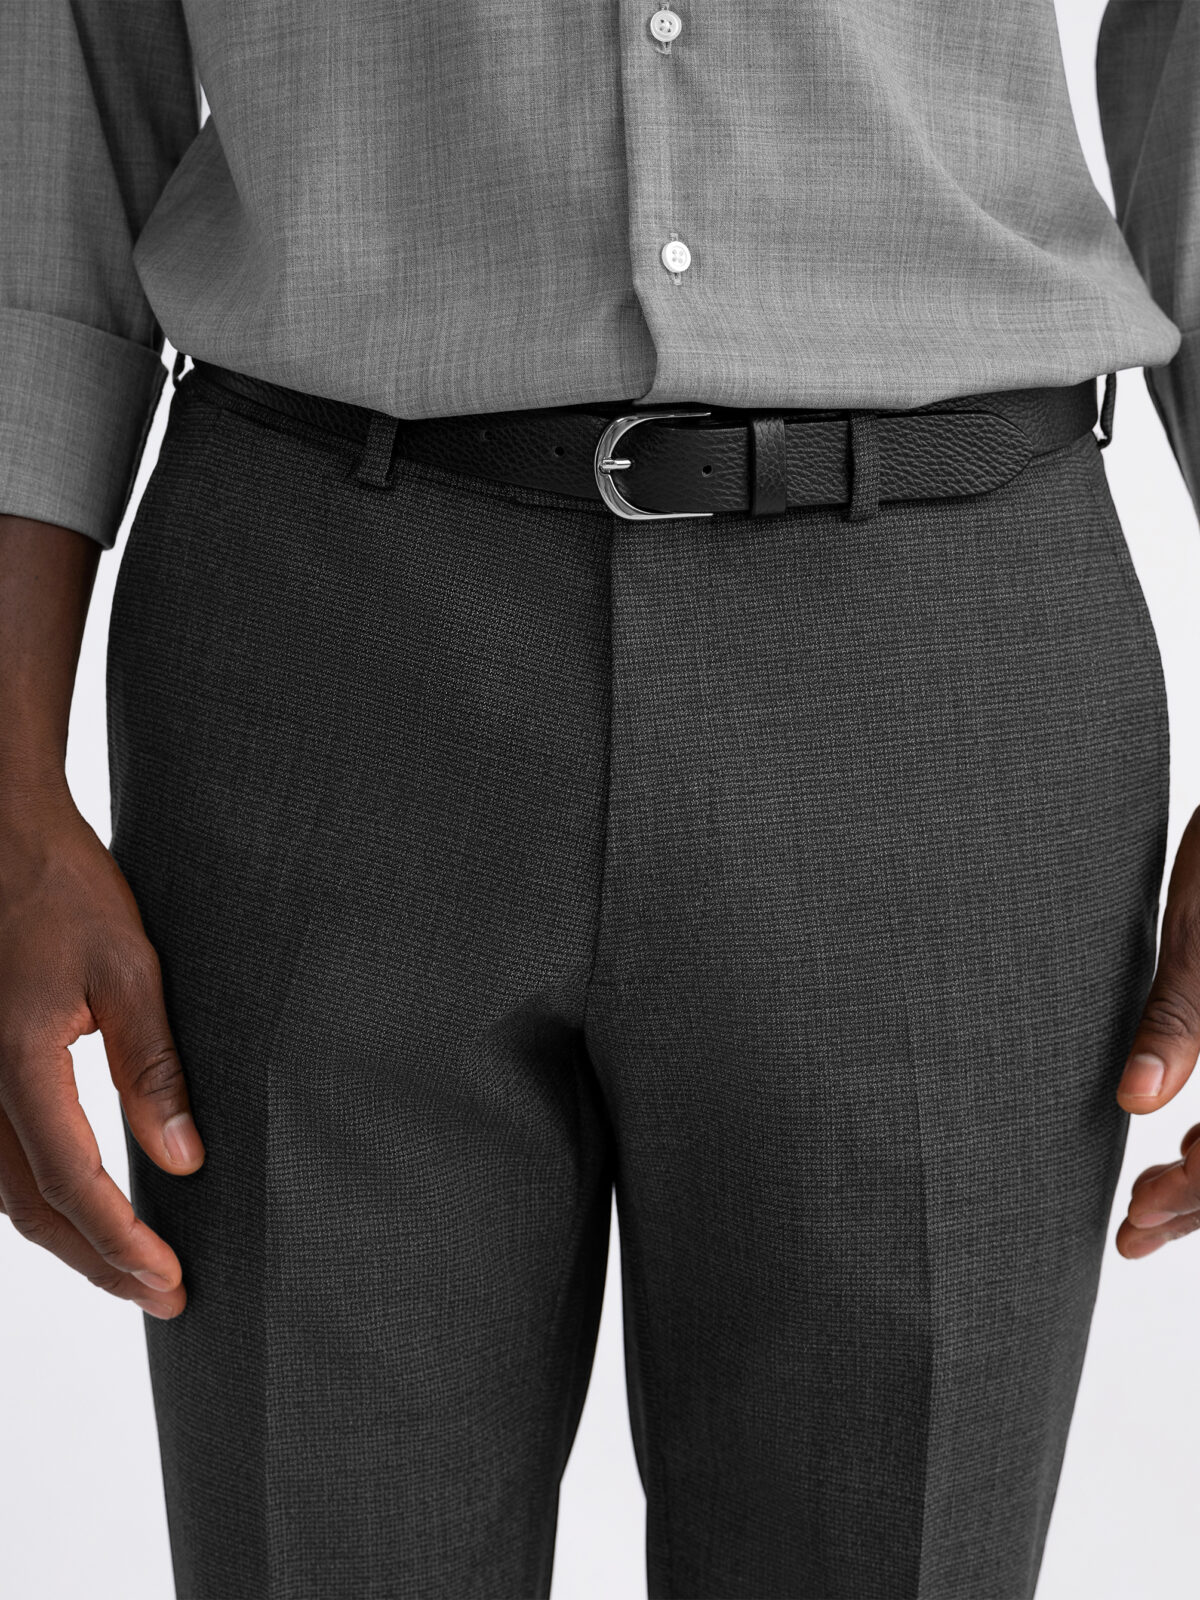 Light gray dress pants hand tailored in a fitted straight cut